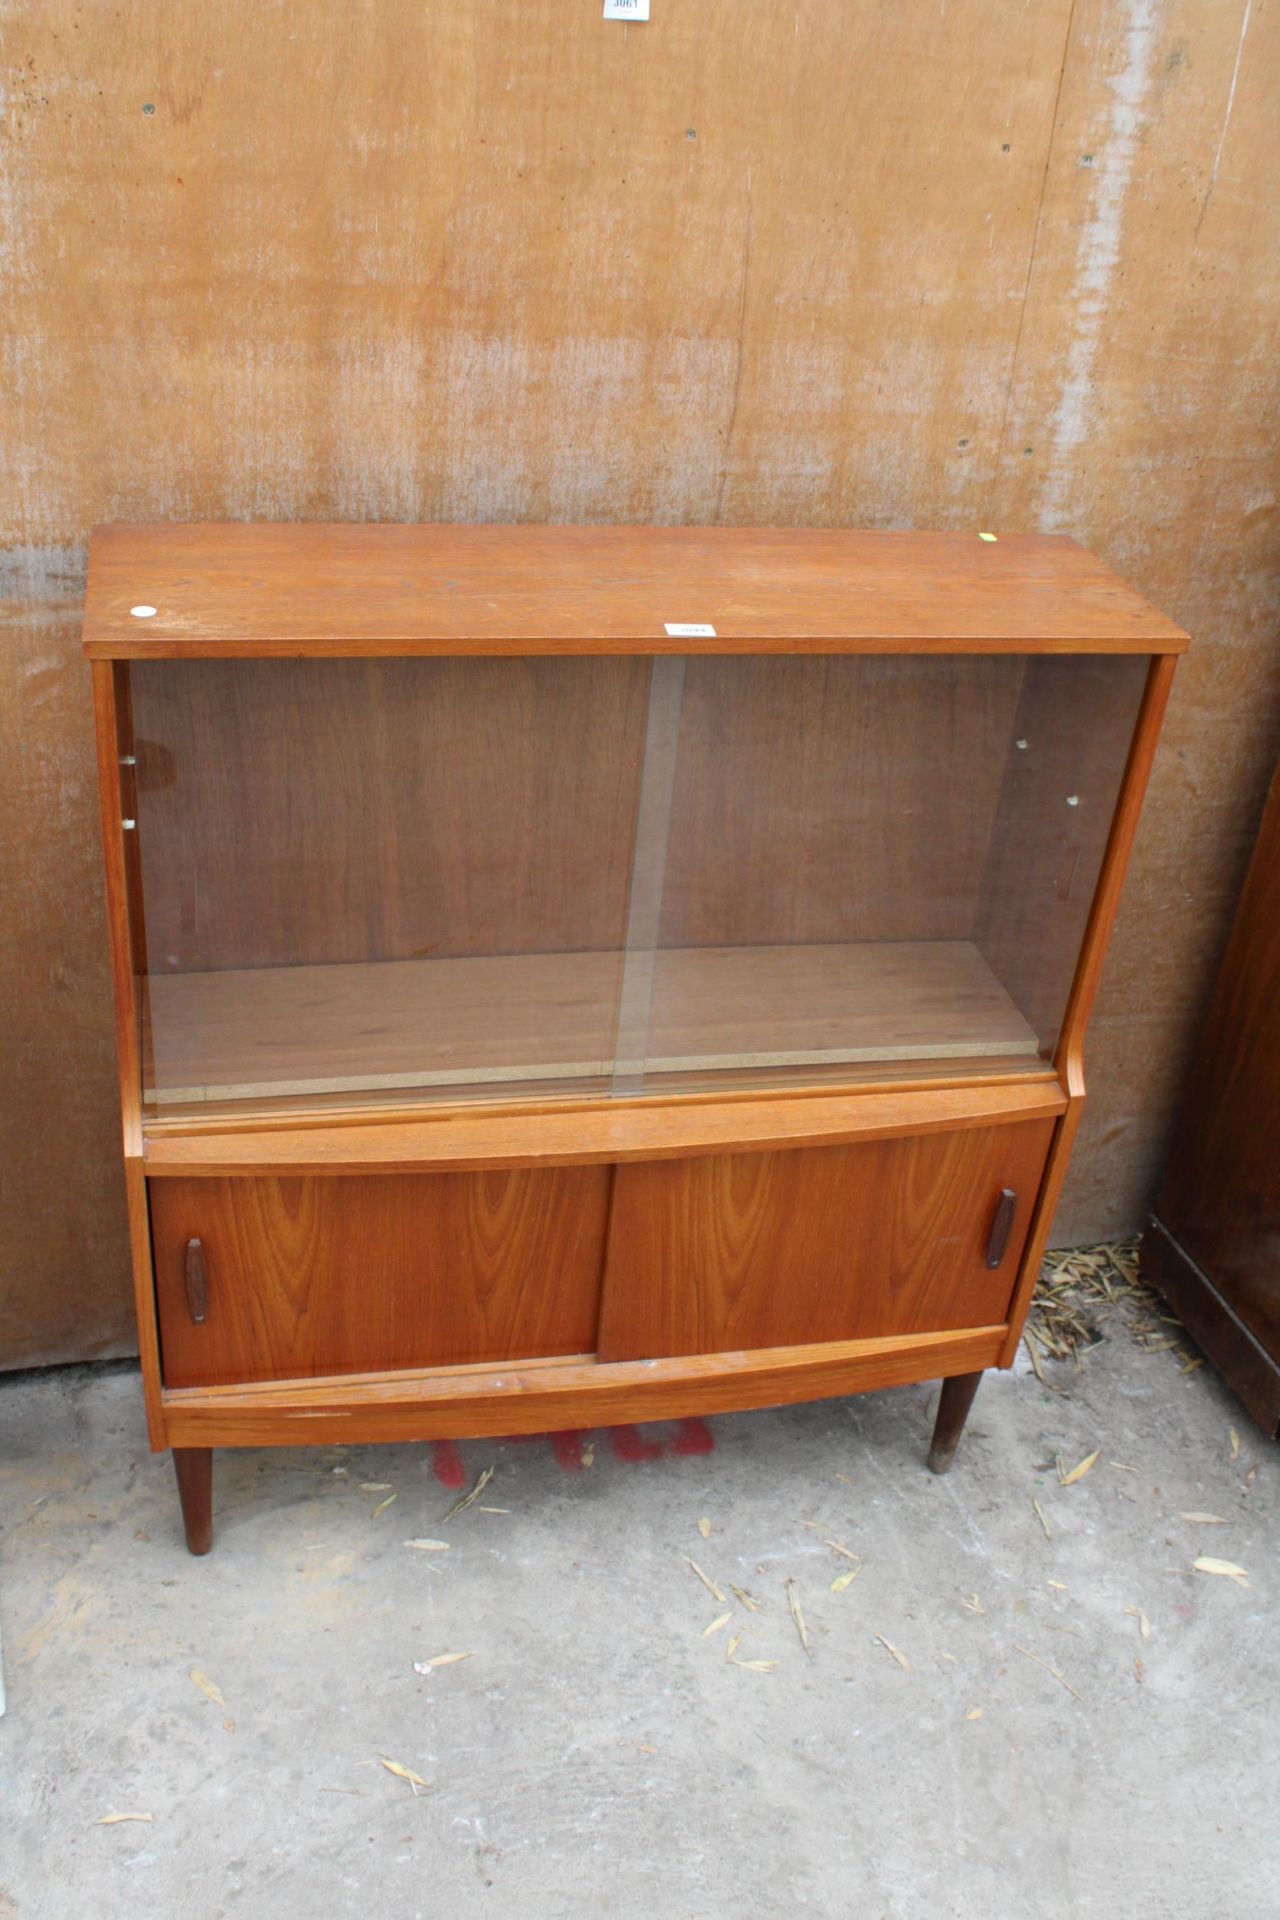 A RETRO TEAK DONCRAFT FURNITURE RETRO BOOKCASE WITH FOUR SLIDING DOORS, TWO BEING GLASS 36" WIDE